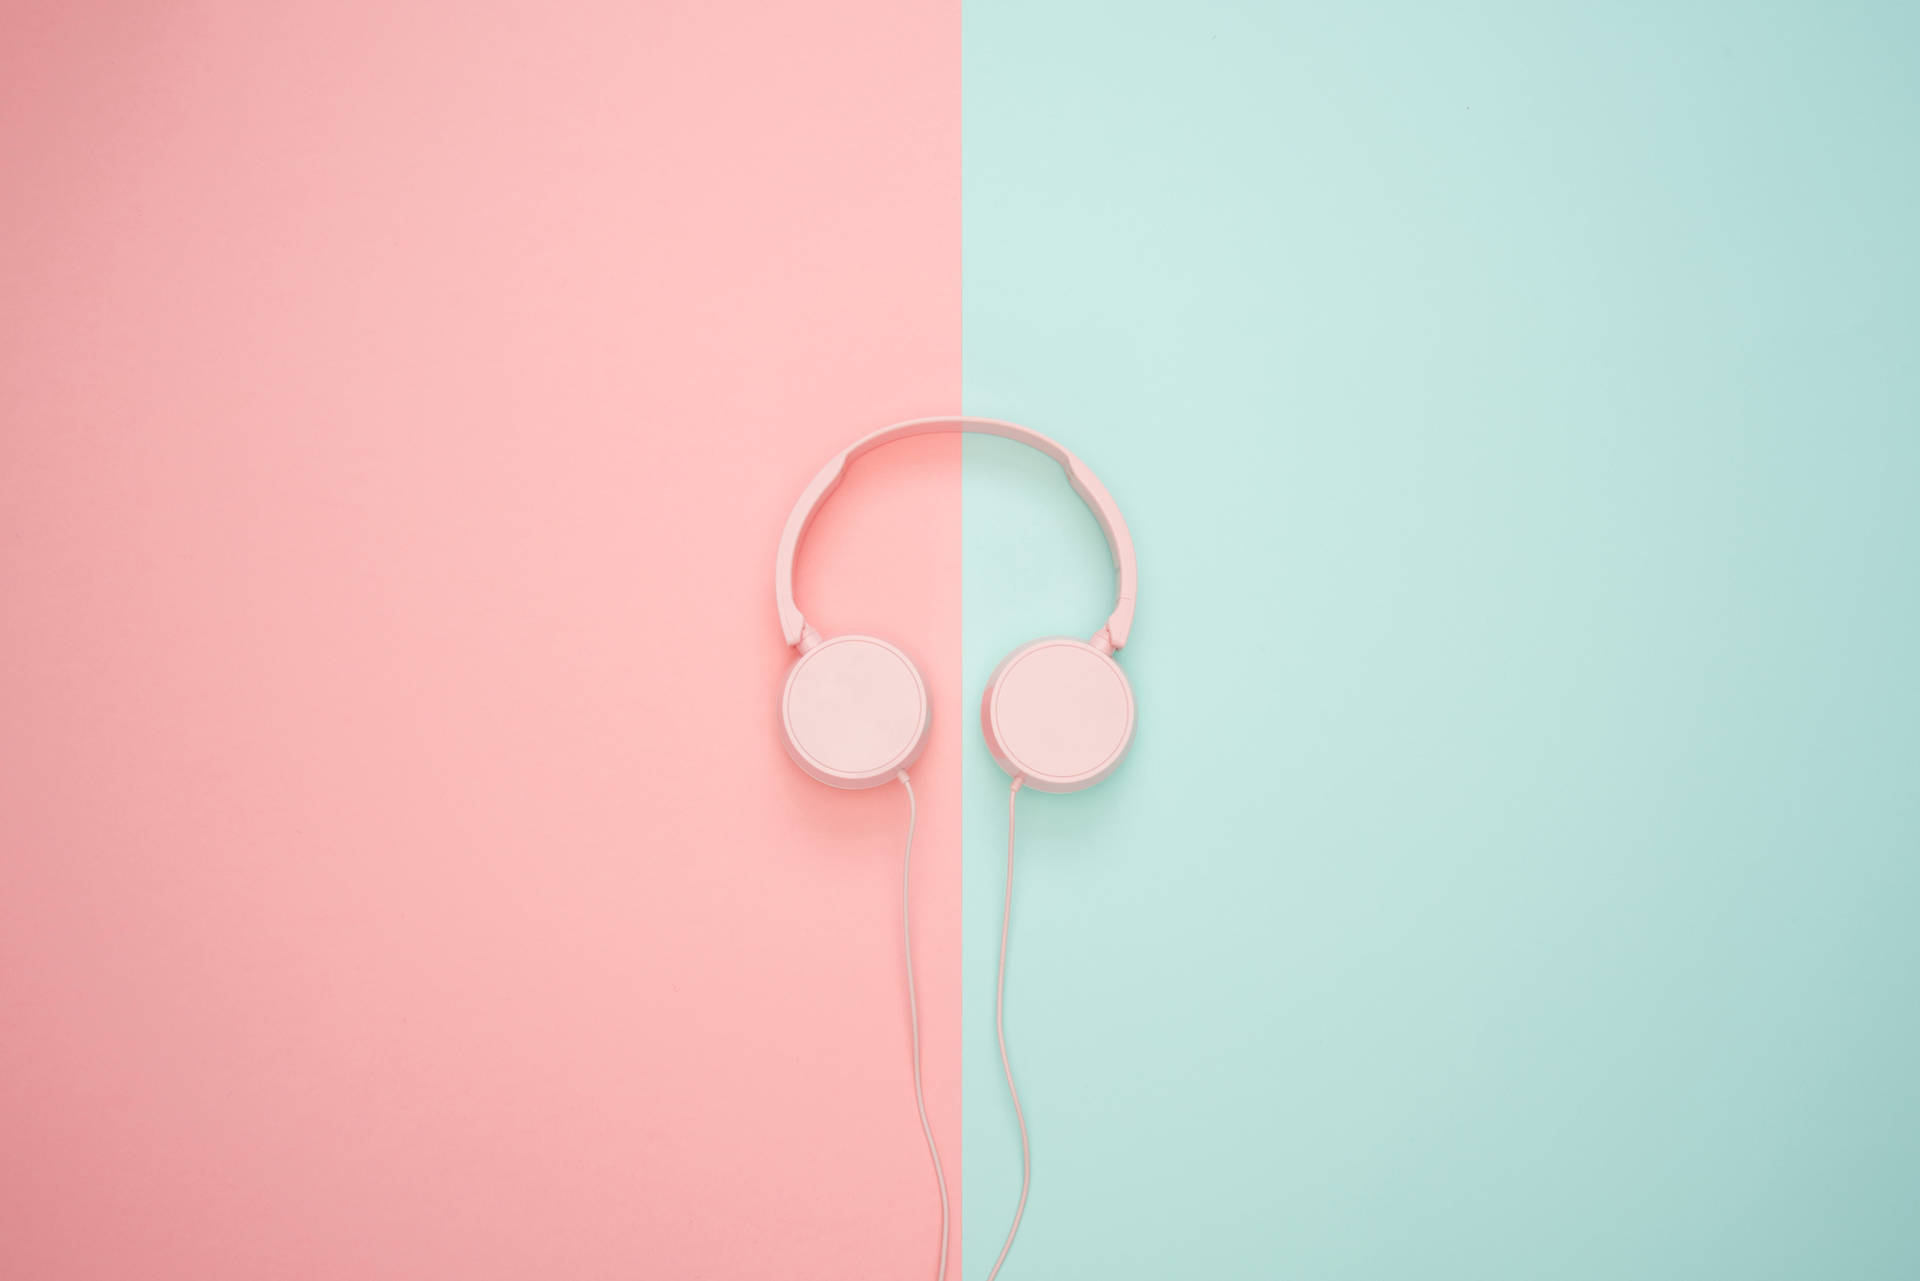 5874X3921 Pastel Aesthetic Wallpaper and Background